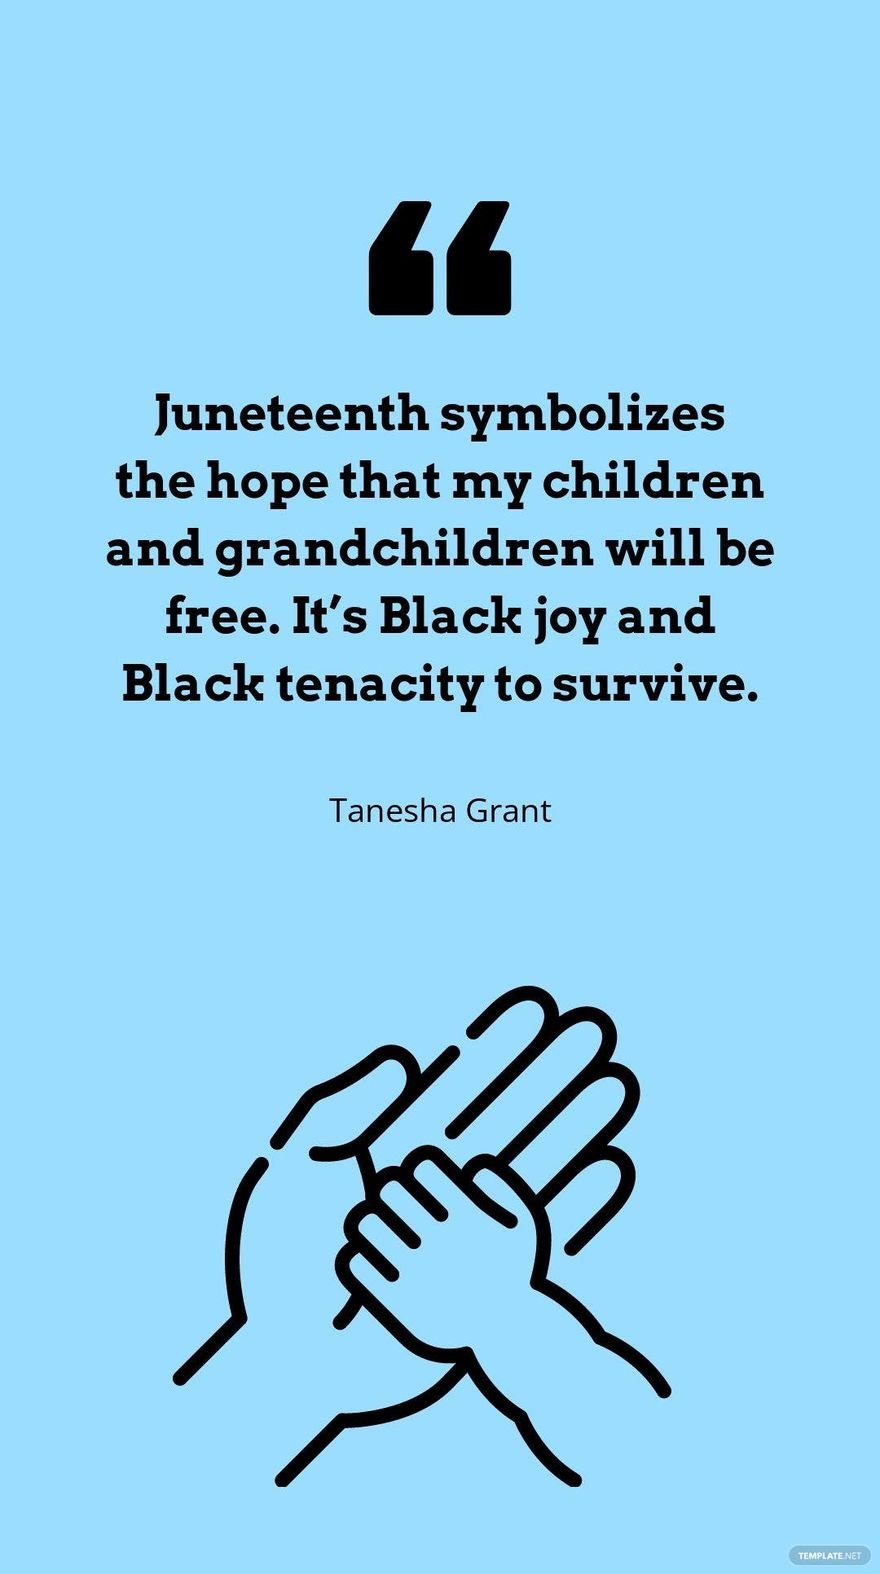 Tanesha Grant - Juneteenth symbolizes the hope that my children and grandchildren will be free. It’s Black joy and Black tenacity to survive.